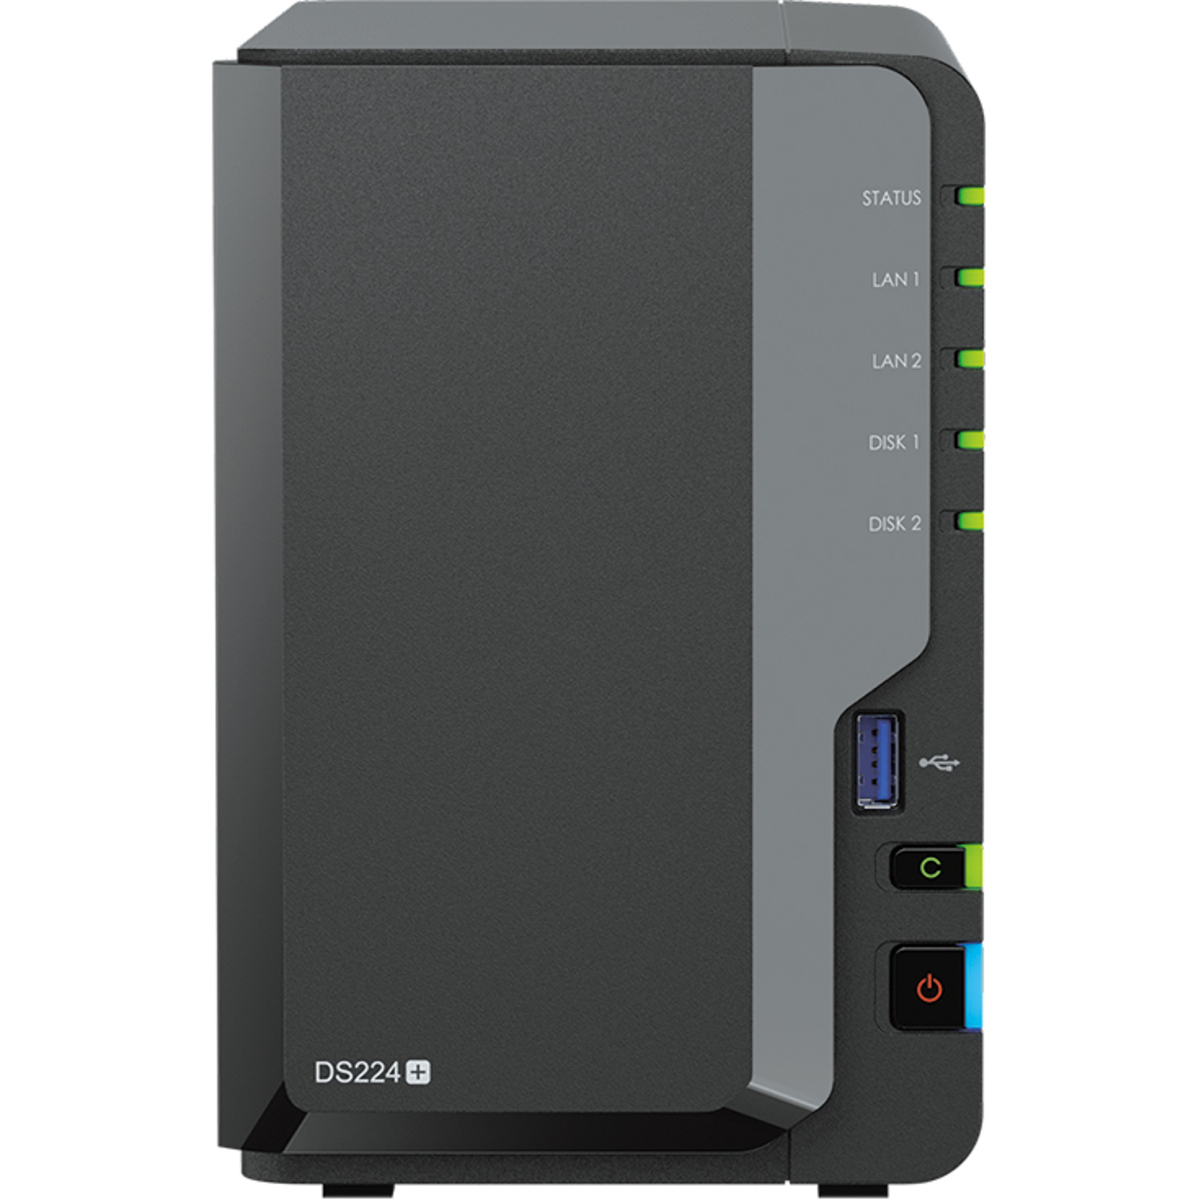 Synology DiskStation DS224+ 32tb 2-Bay Desktop Personal / Basic Home / Small Office NAS - Network Attached Storage Device 2x16tb Seagate IronWolf Pro ST16000NT001 3.5 7200rpm SATA 6Gb/s HDD NAS Class Drives Installed - Burn-In Tested - ON SALE - FREE RAM UPGRADE DiskStation DS224+